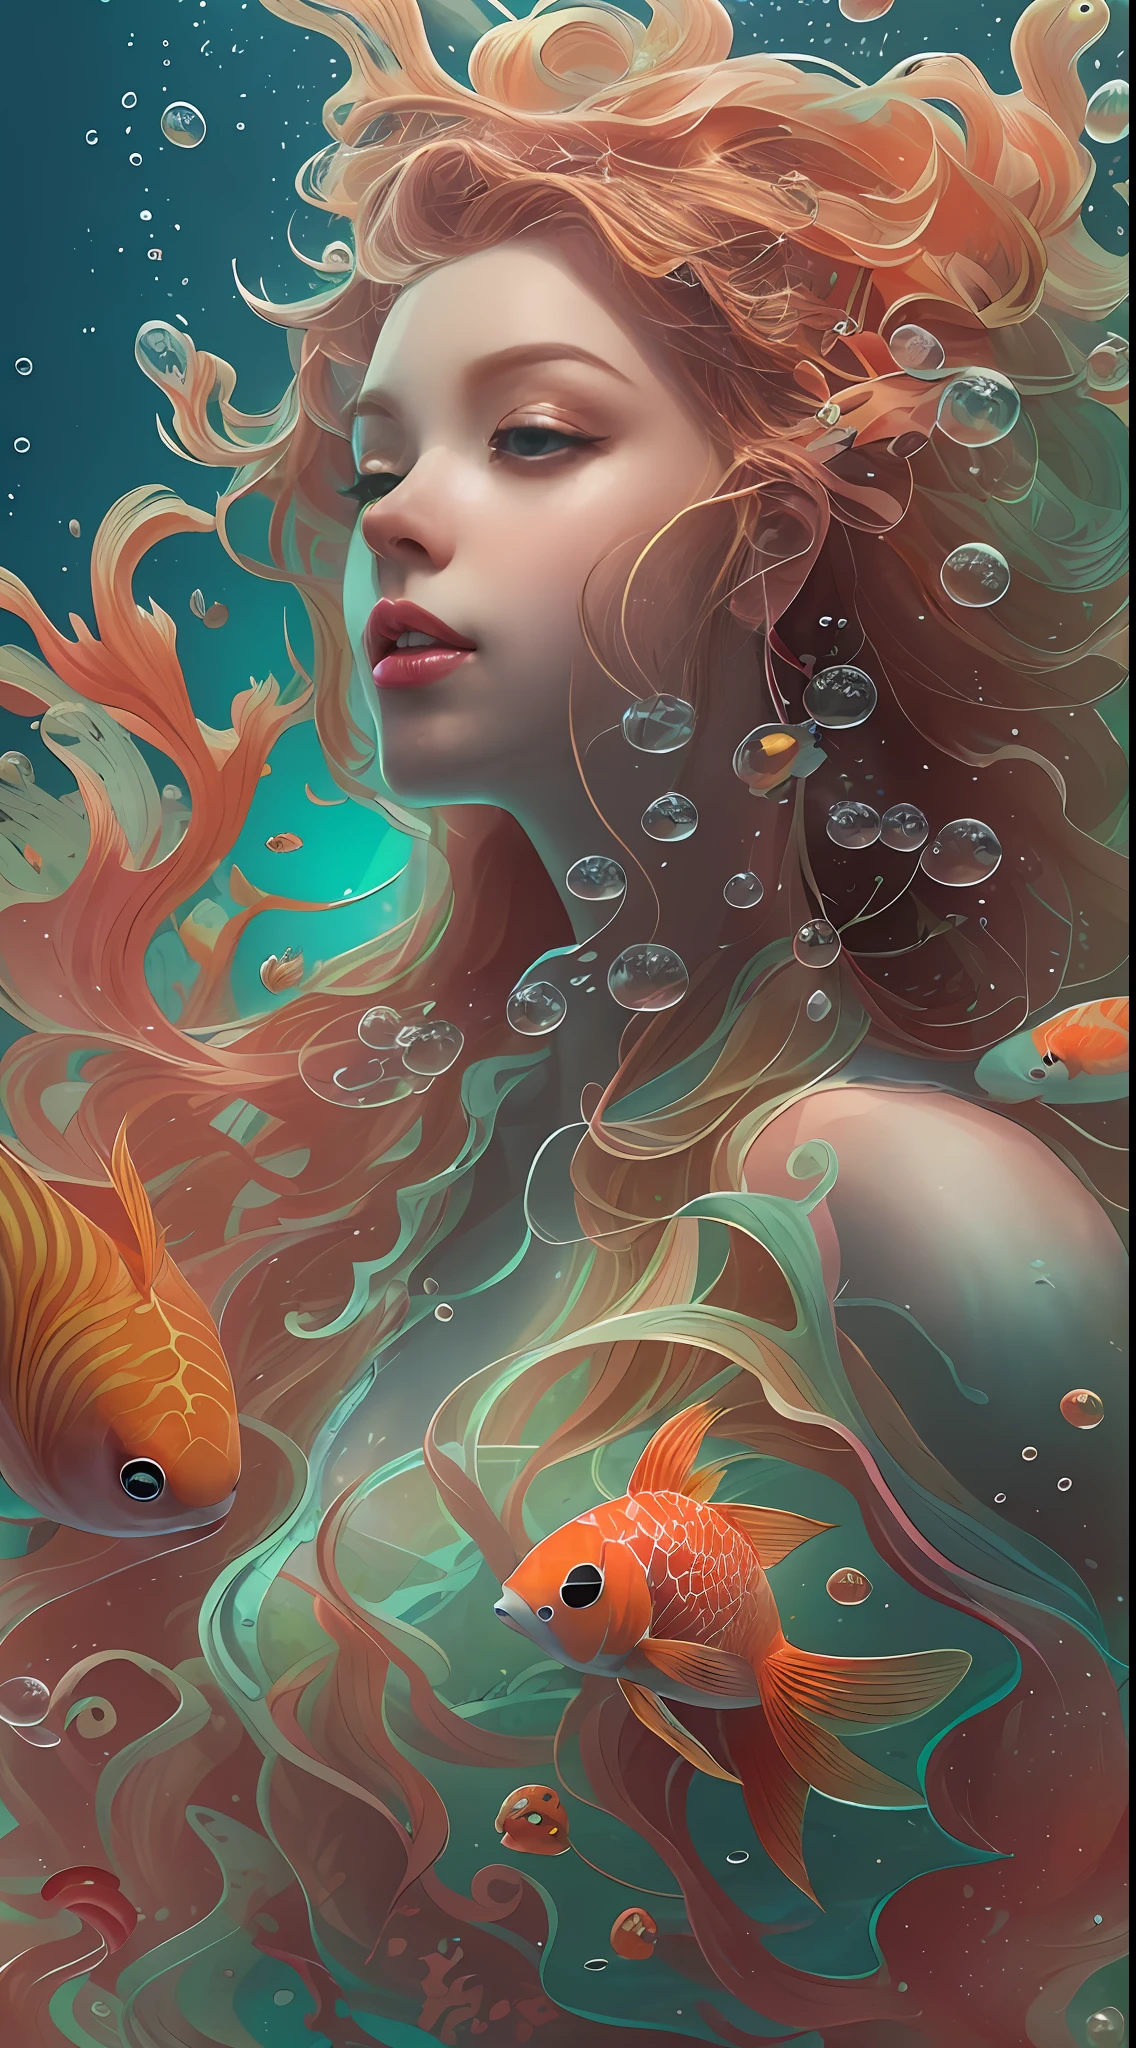 ModelShoot style, (Extremely detailed Cg Unity 8K wallpaper), A chaotic storm of intricate liquid smoke in the head, Stylized abstract photo of mermaid girl, wetted skin,Koi，Beautiful koi，Flocks of koi,carp，Strange shaped corals，ocean floor，Beautiful coral reef in the background，Rochas,Marine life，colorful coral reef,Decorate with coral reefs,author：Petros Afshar, ross tran, tom whalen, Peter Mohrbacher, Art germ, ((bubbly underwater scenery)) Radiant light octane rendering is highly detailed, inspired by Yanjun Cheng, Beautiful digital artwork, Guviz-style artwork, 8K highly detailed digital art, Beautiful digital illustration, Cute detailed digital art, stunning digital illustration, A beautiful artwork illustration, Exquisite digital illustration,8K detailed digital art,
Warming up